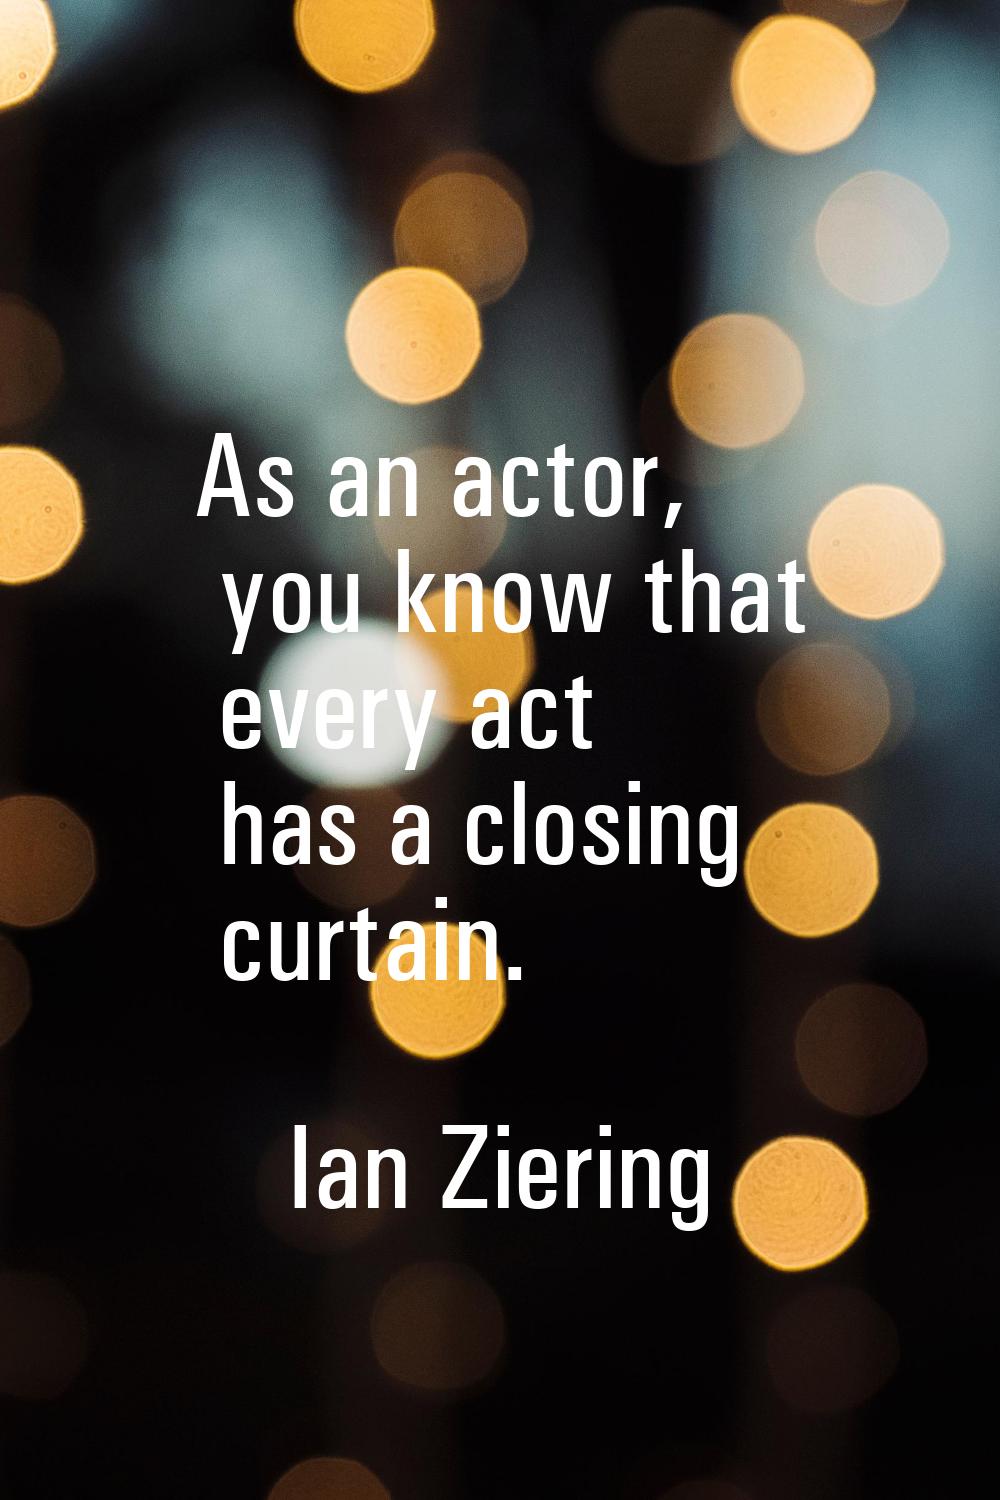 As an actor, you know that every act has a closing curtain.